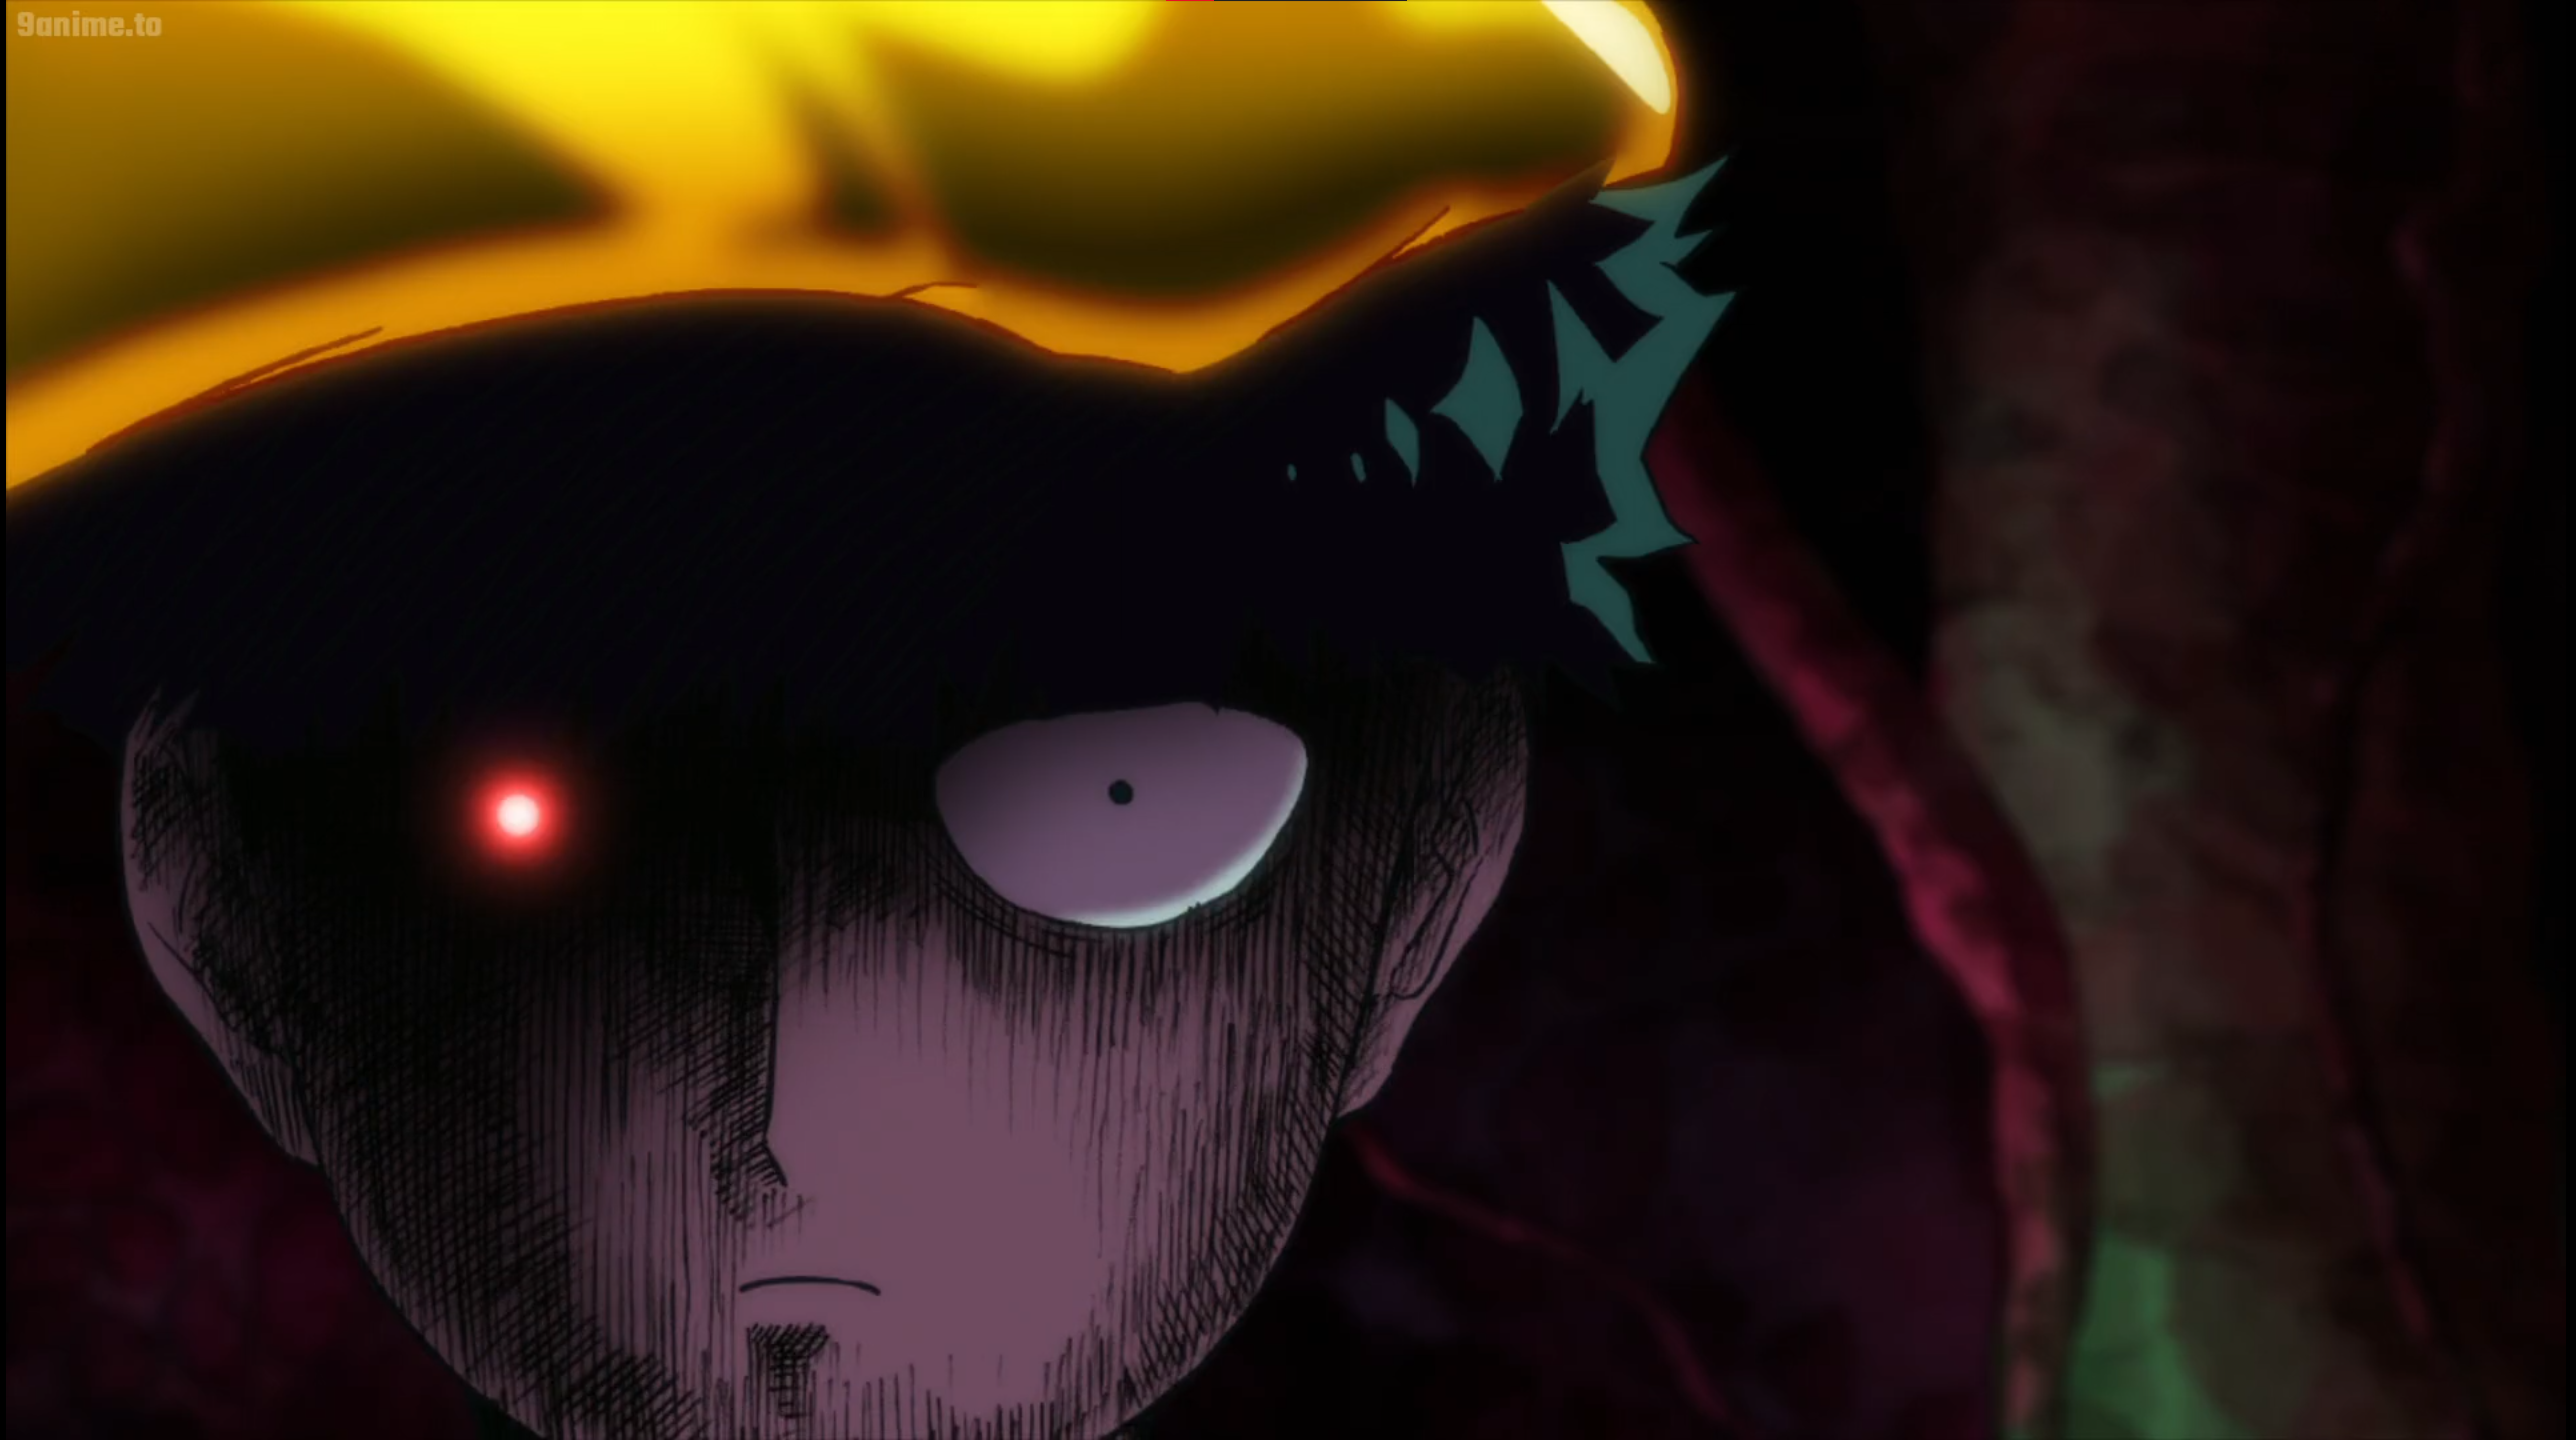 Mob Psycho 100 II Episode 5 Discussion - Forums 